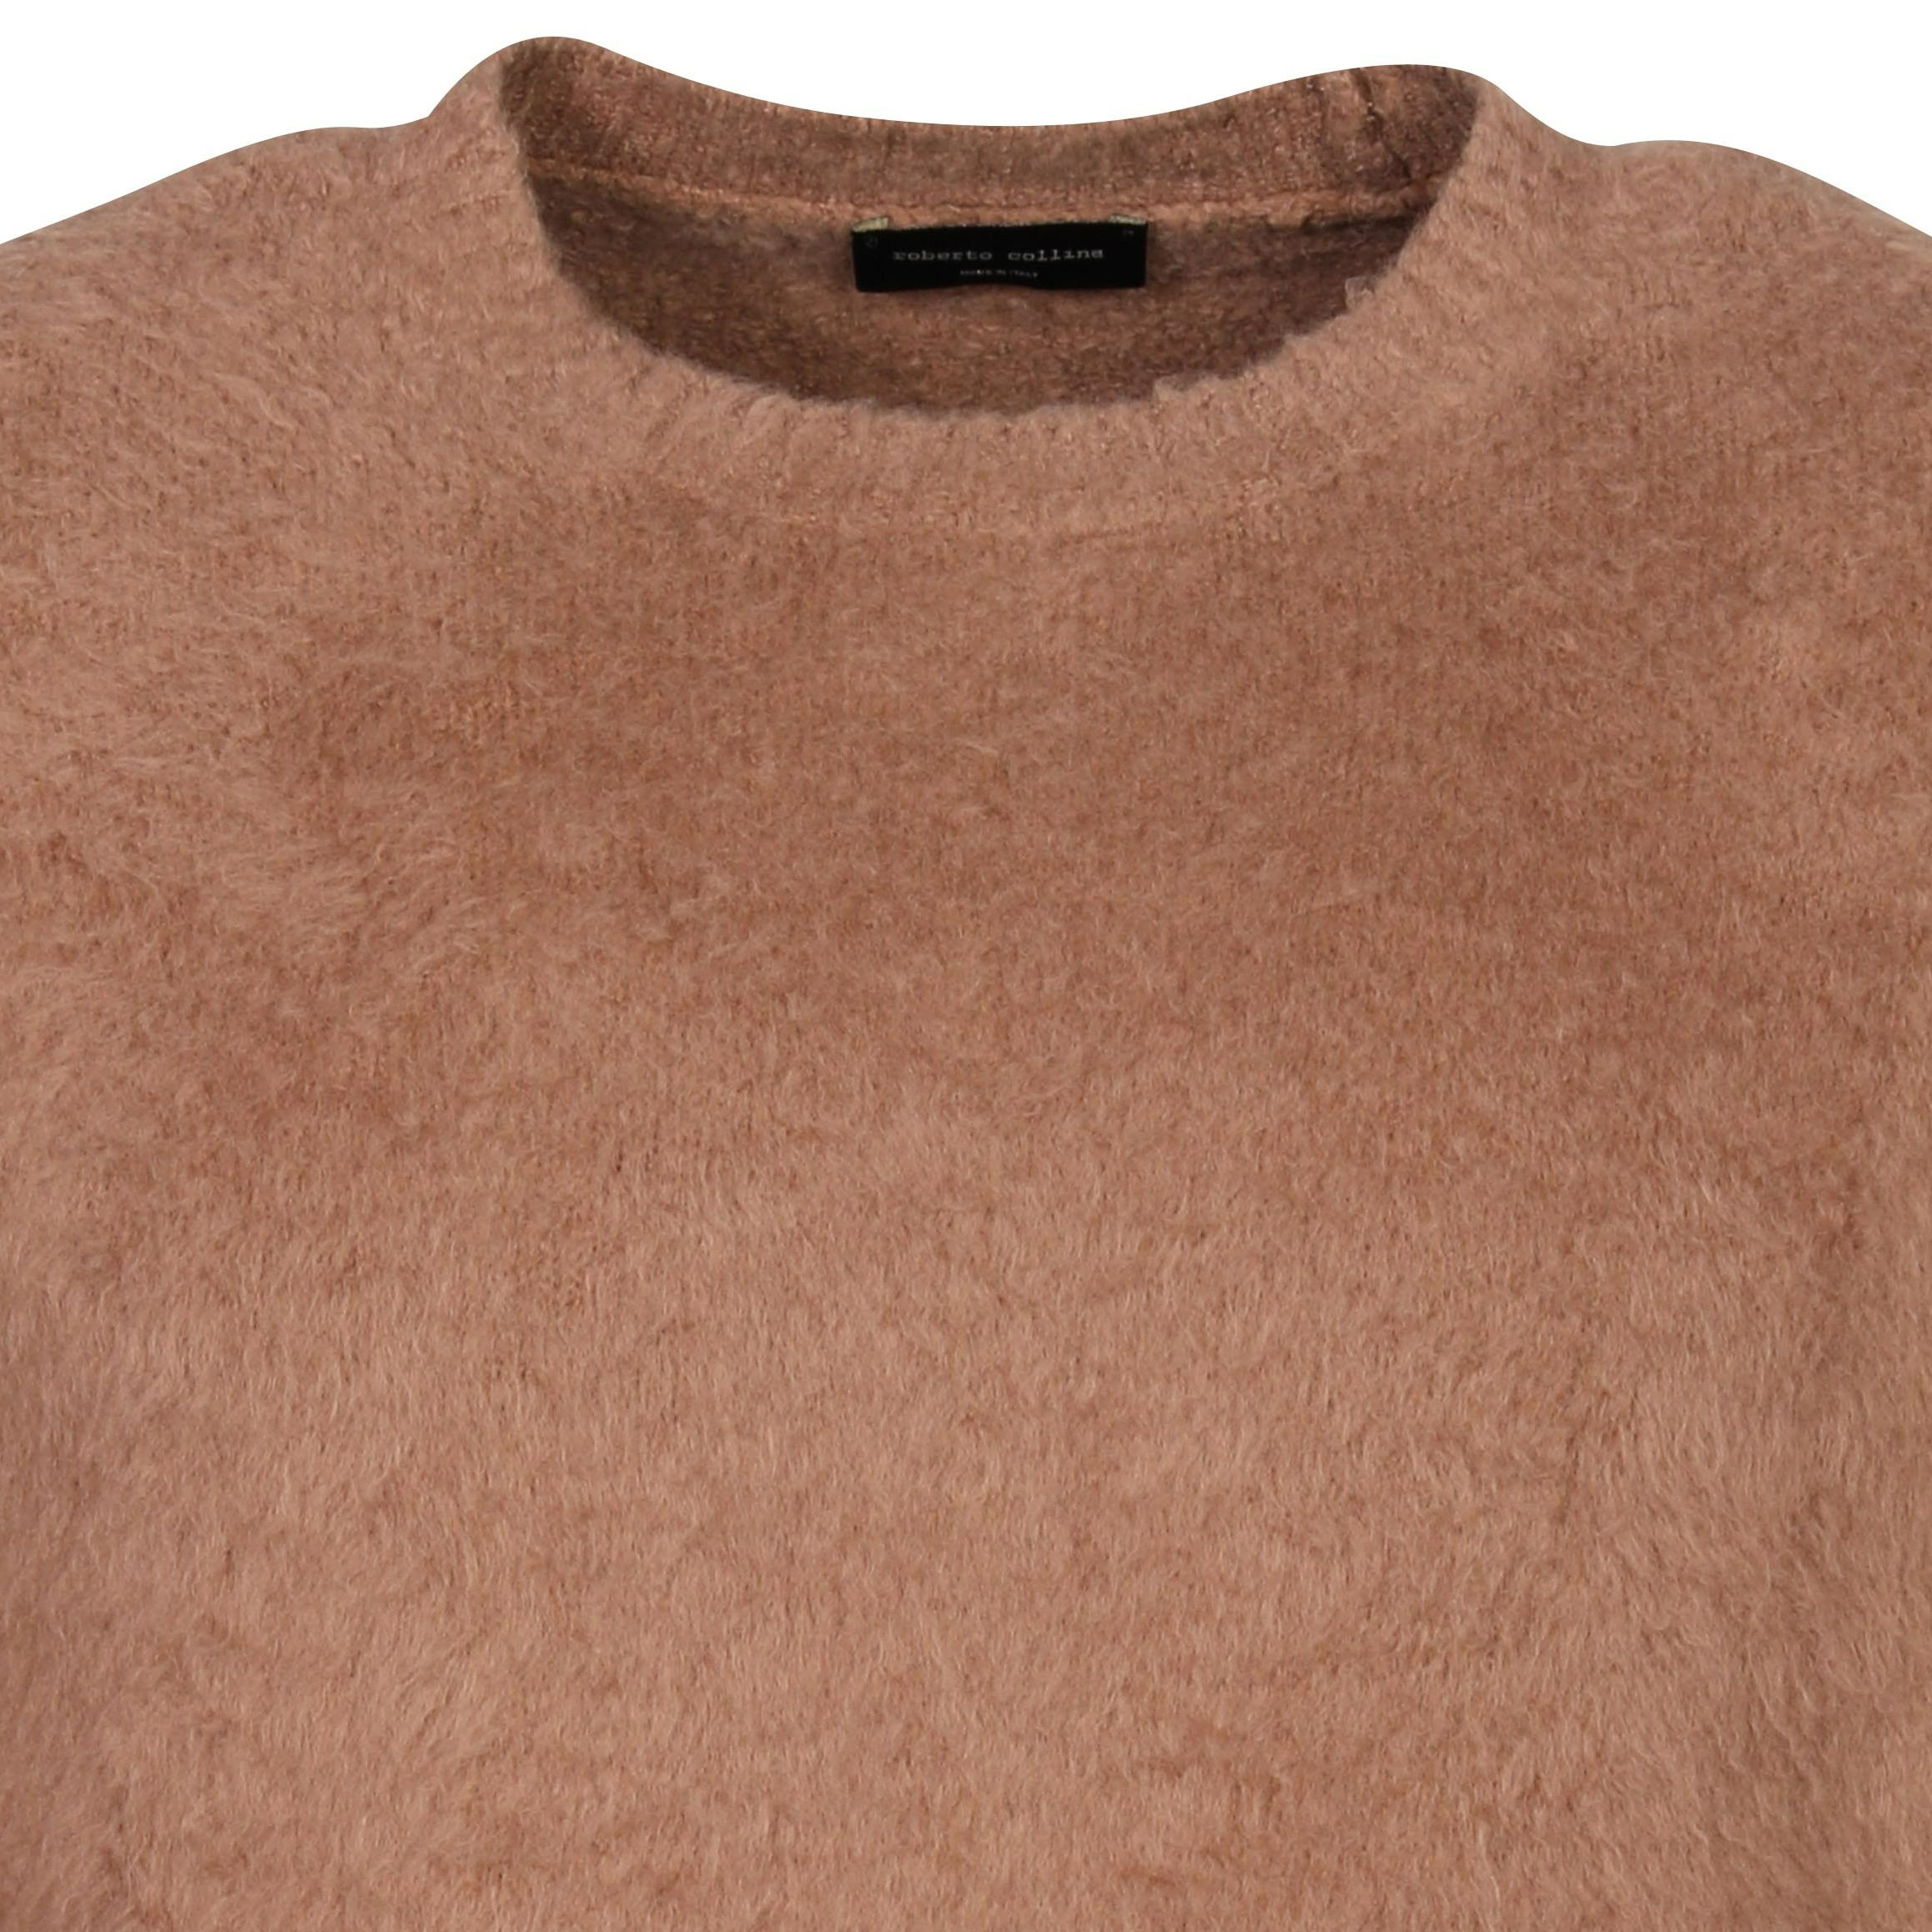 Roberto Collina Cotton Fluffy Knit Pullover in Camel 50